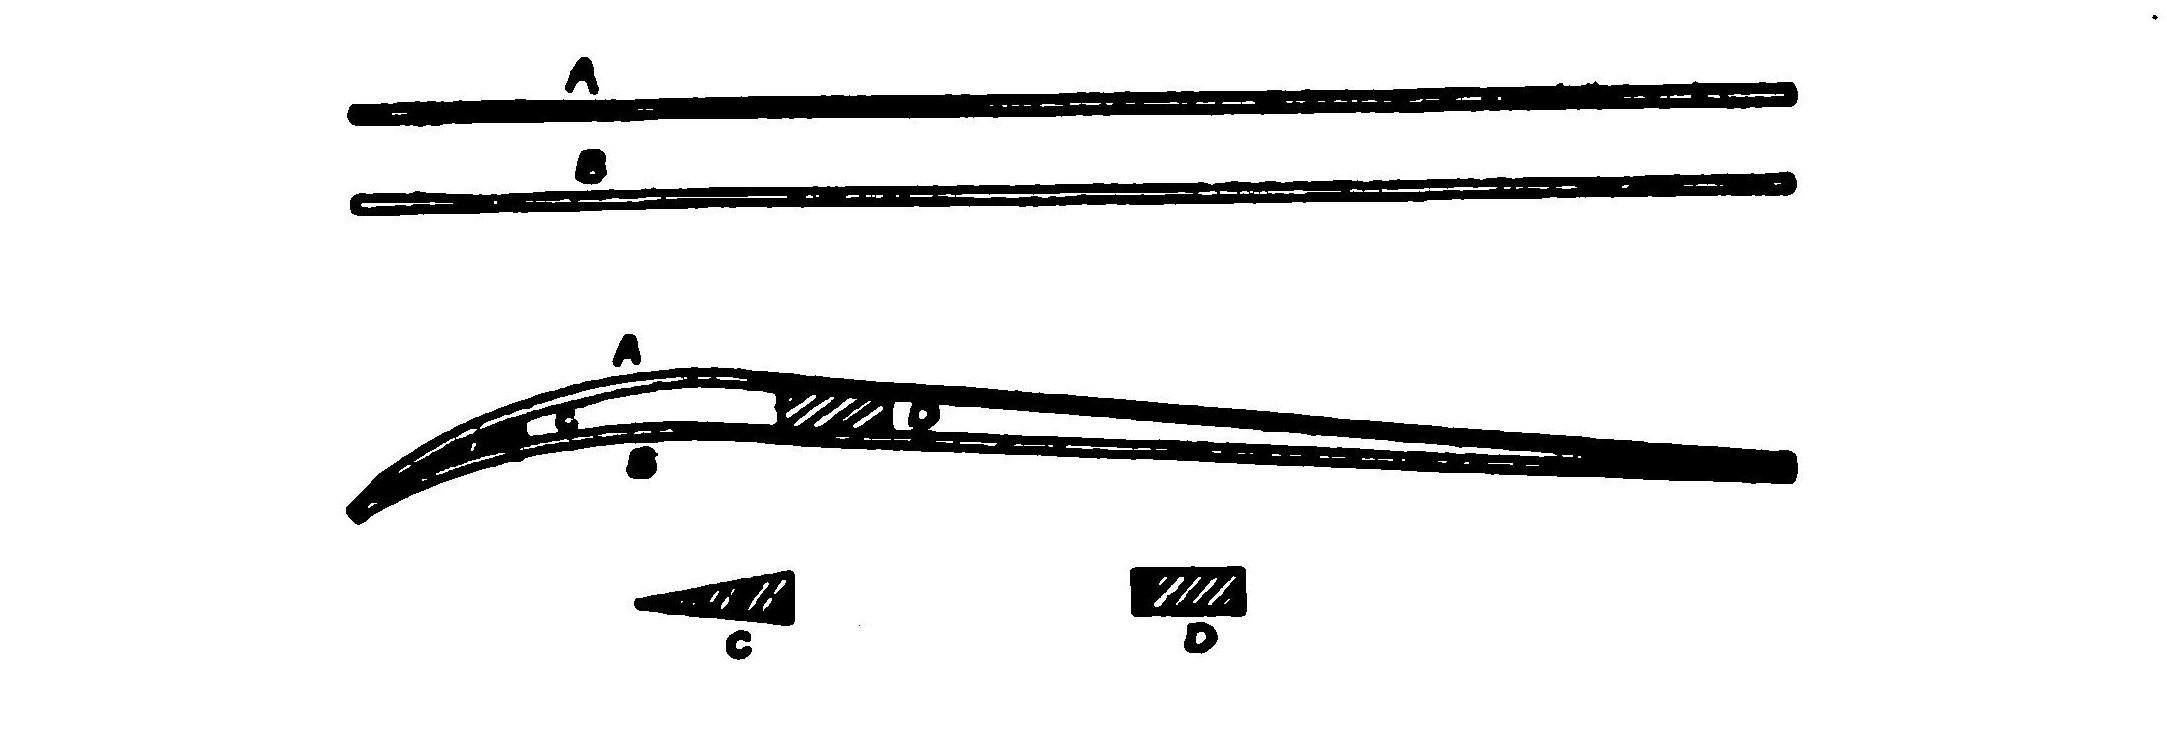 FIG. 13. Section of a built-up plane showing how a rib is made.